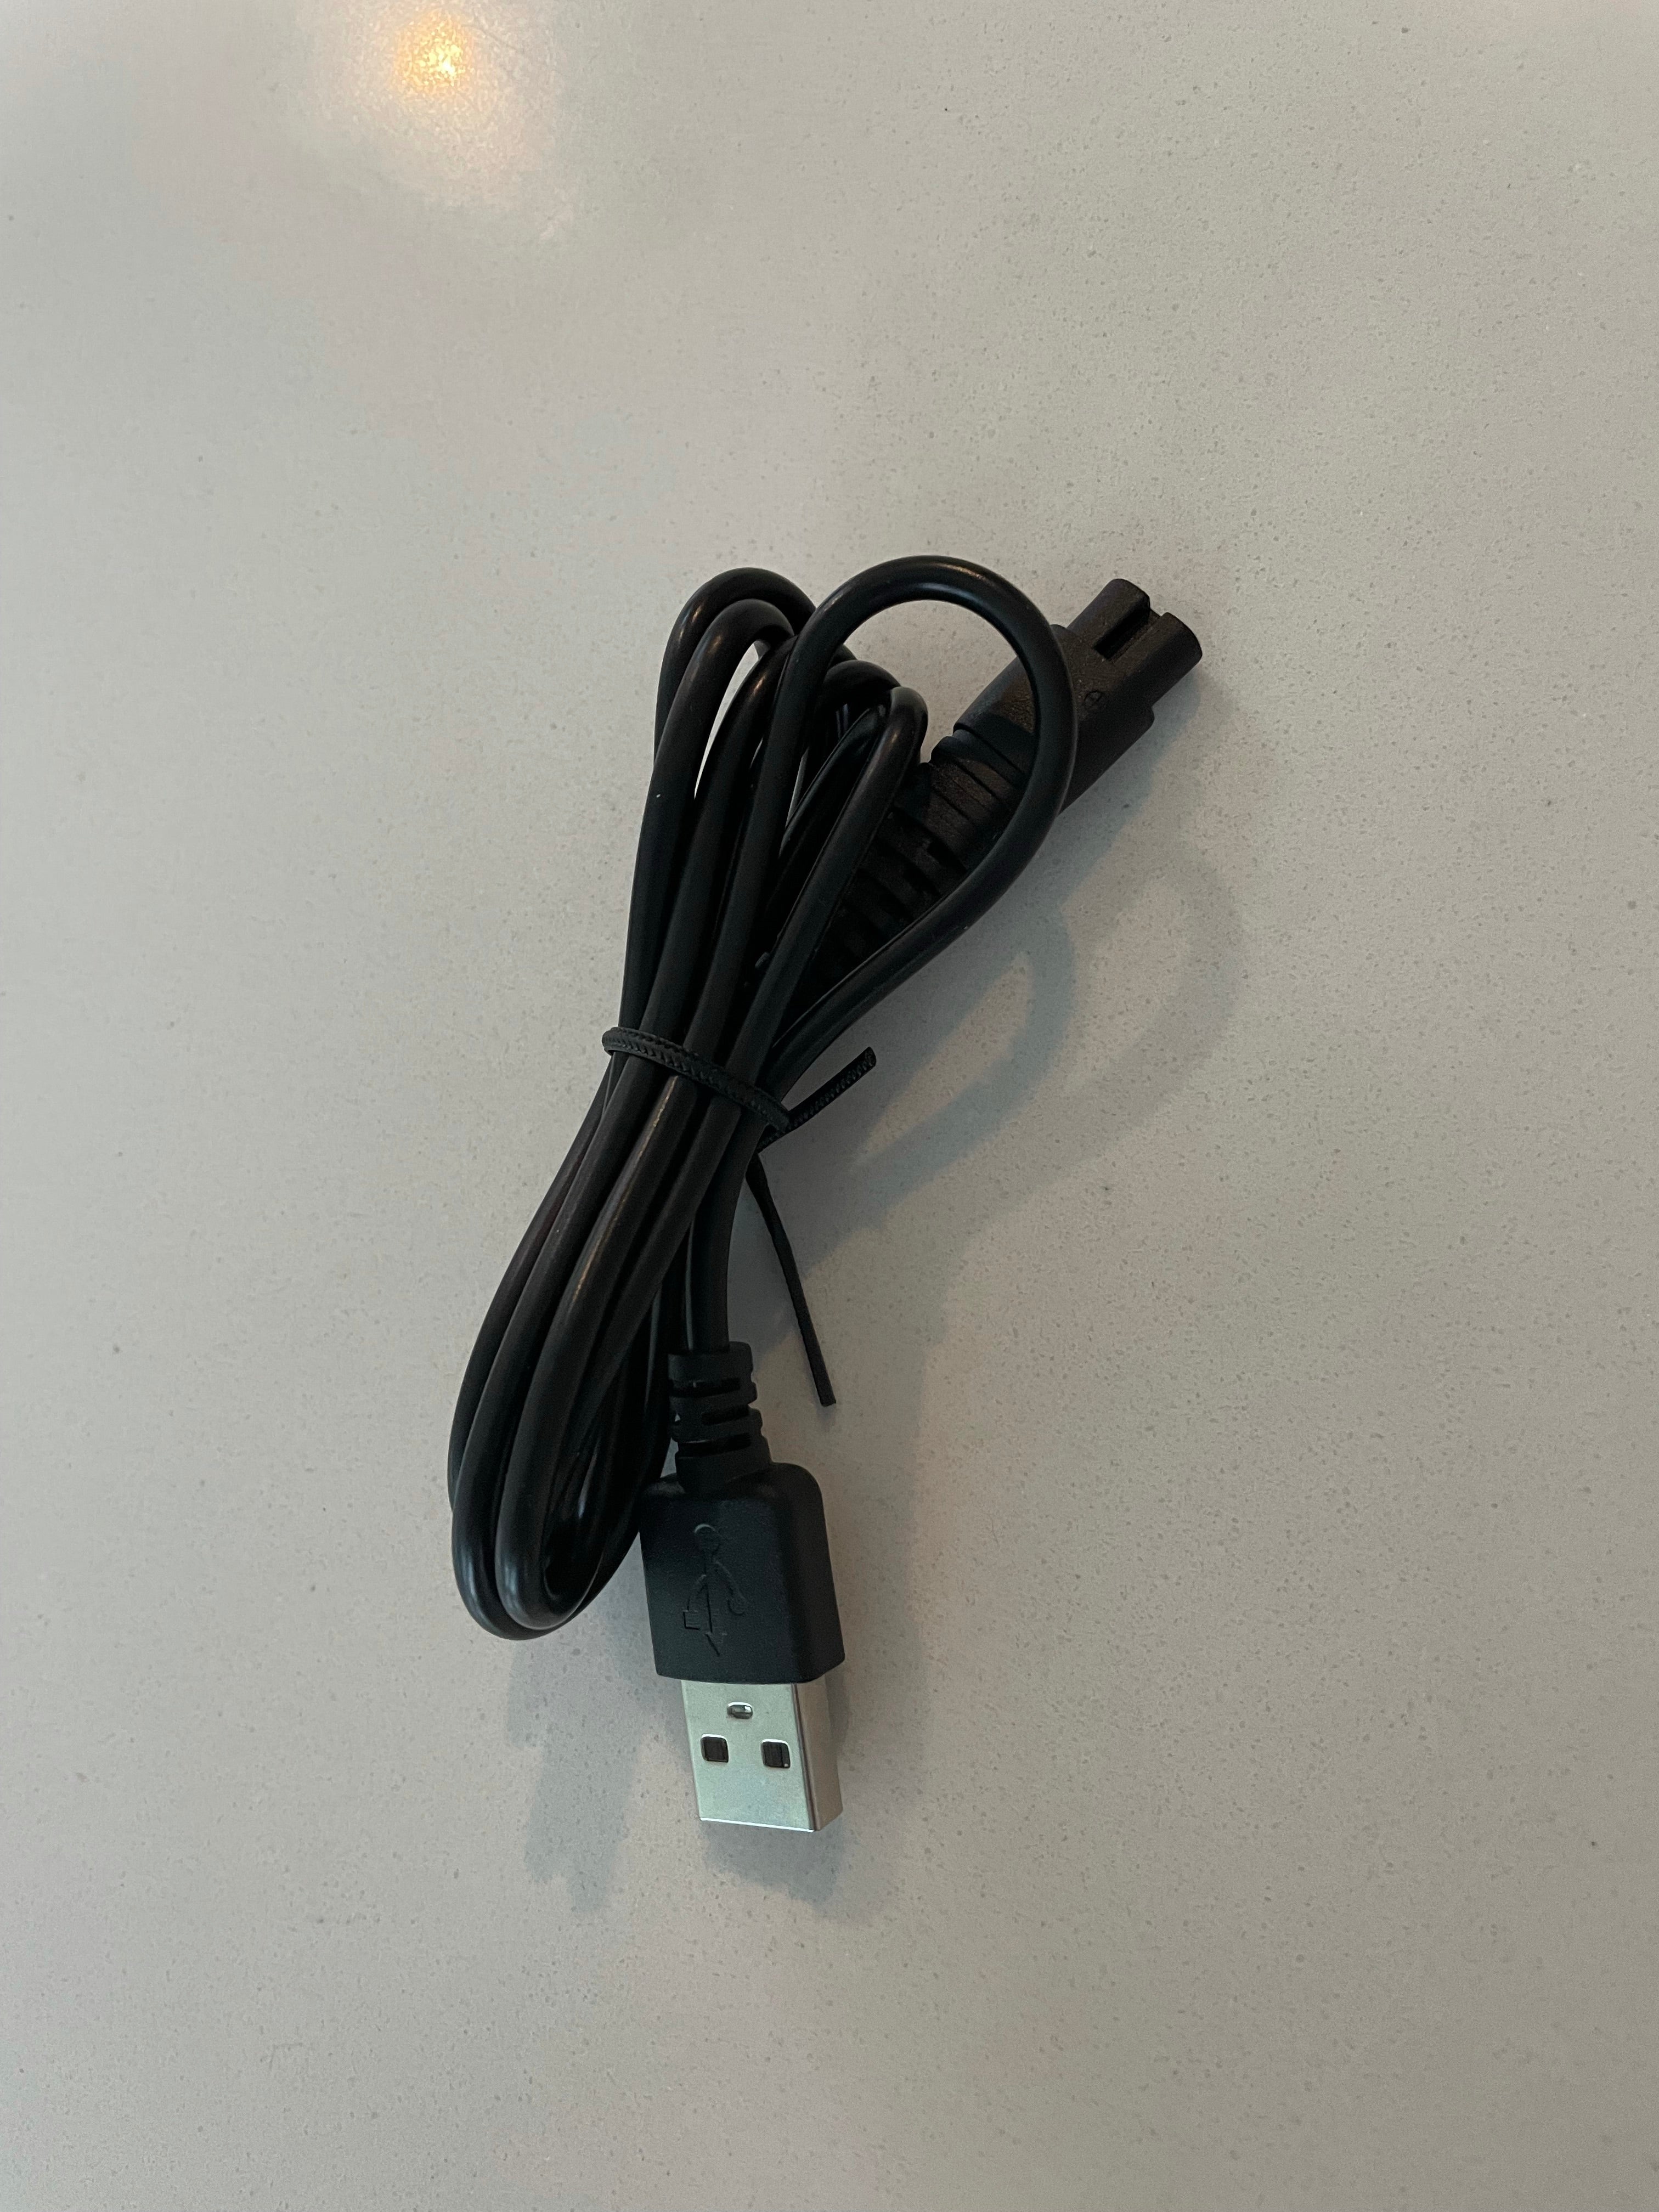 X clipper/trimmer charging usb cable